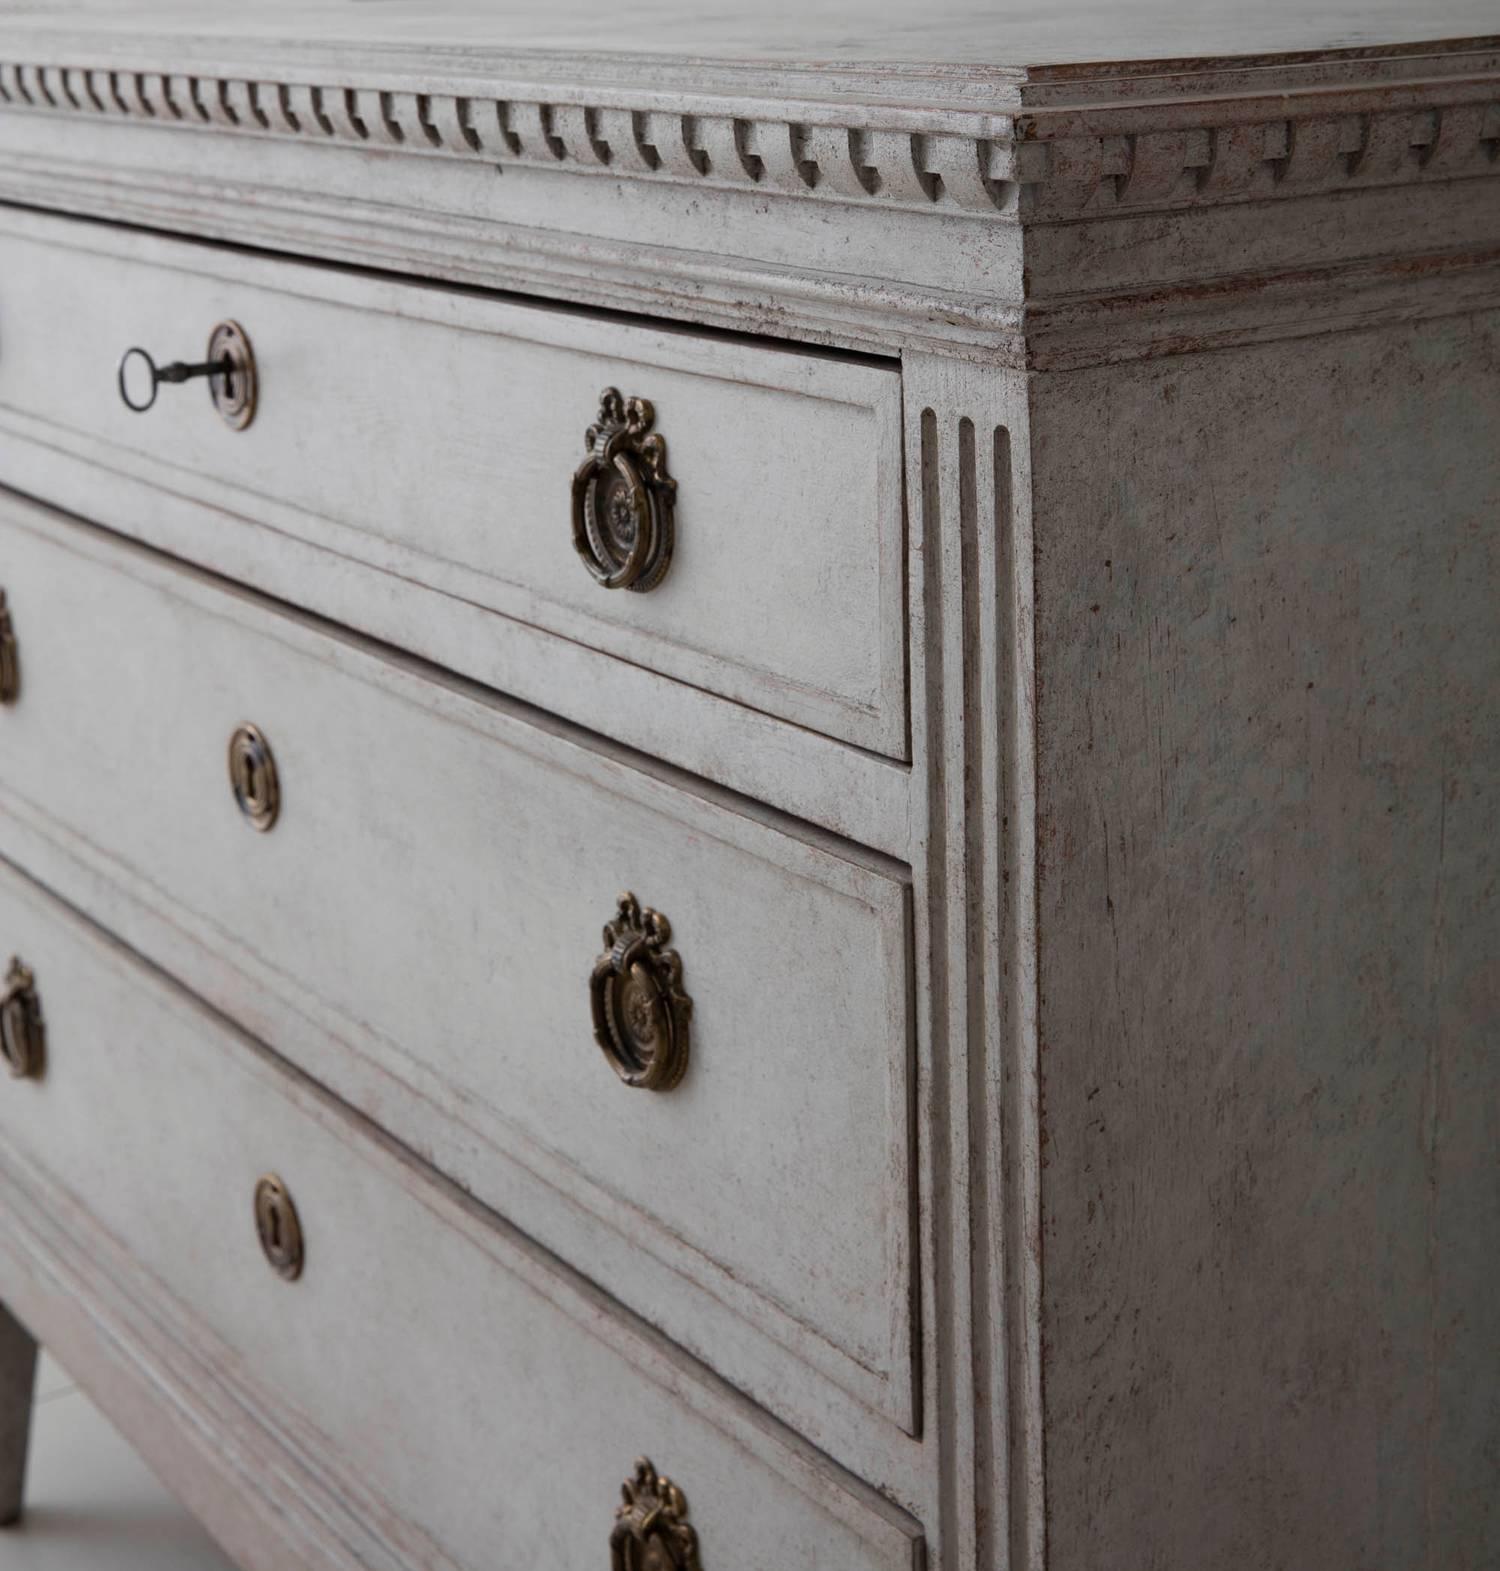 An elegant neoclassical pair of Swedish painted commodes in the Gustavian style. Each chest has three drawers, brass hardware, and original locks and keys. The hand-painted marbleized top is framed by dentil molding. The sides are fluted and the